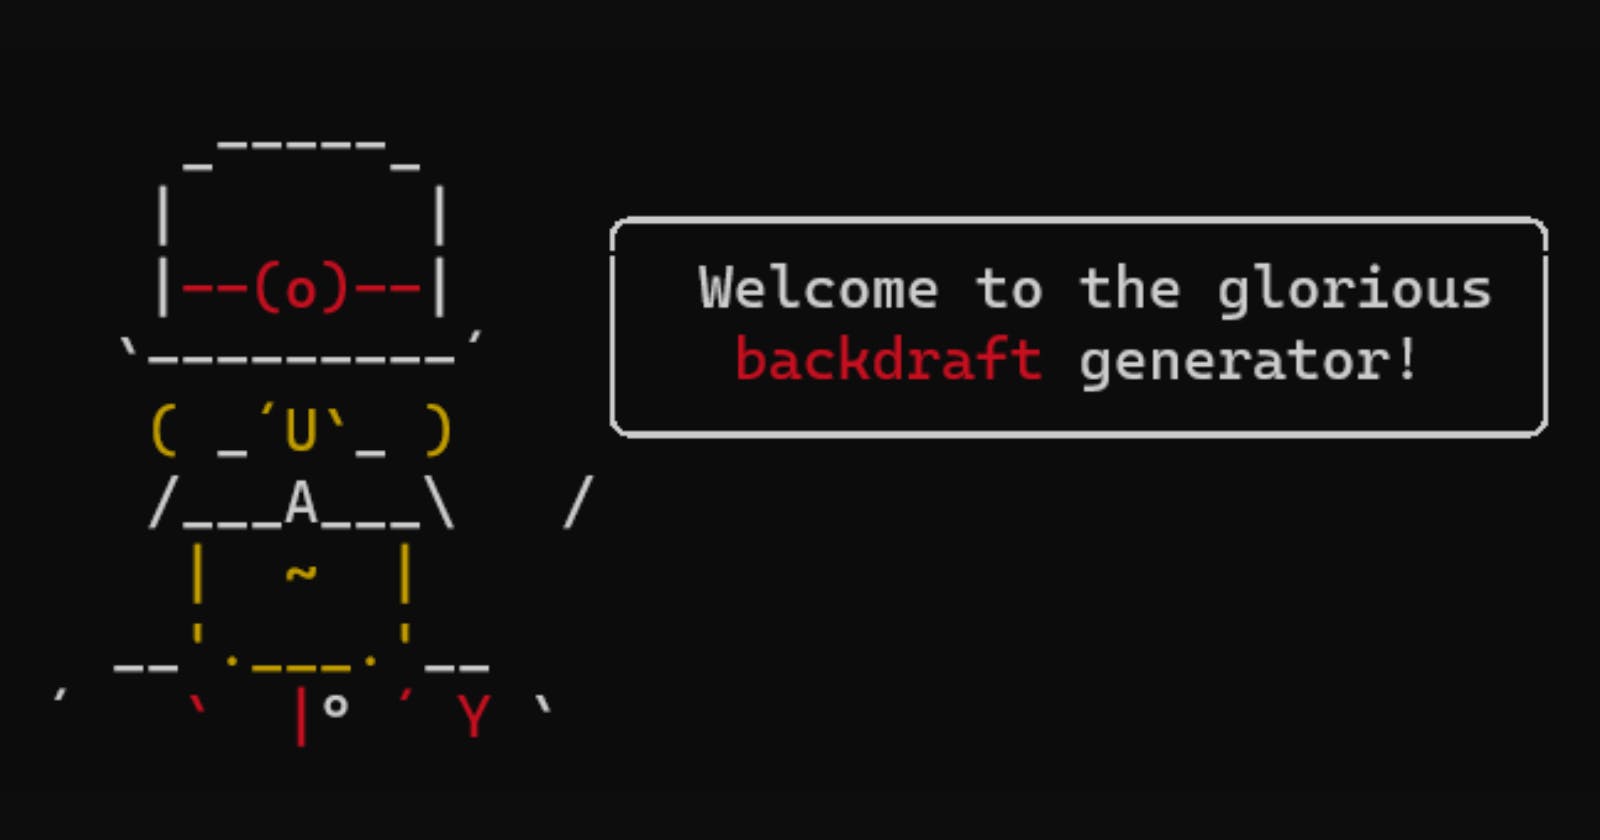 Automate Your Node.js Backend Development with the Backdraft Code Generator